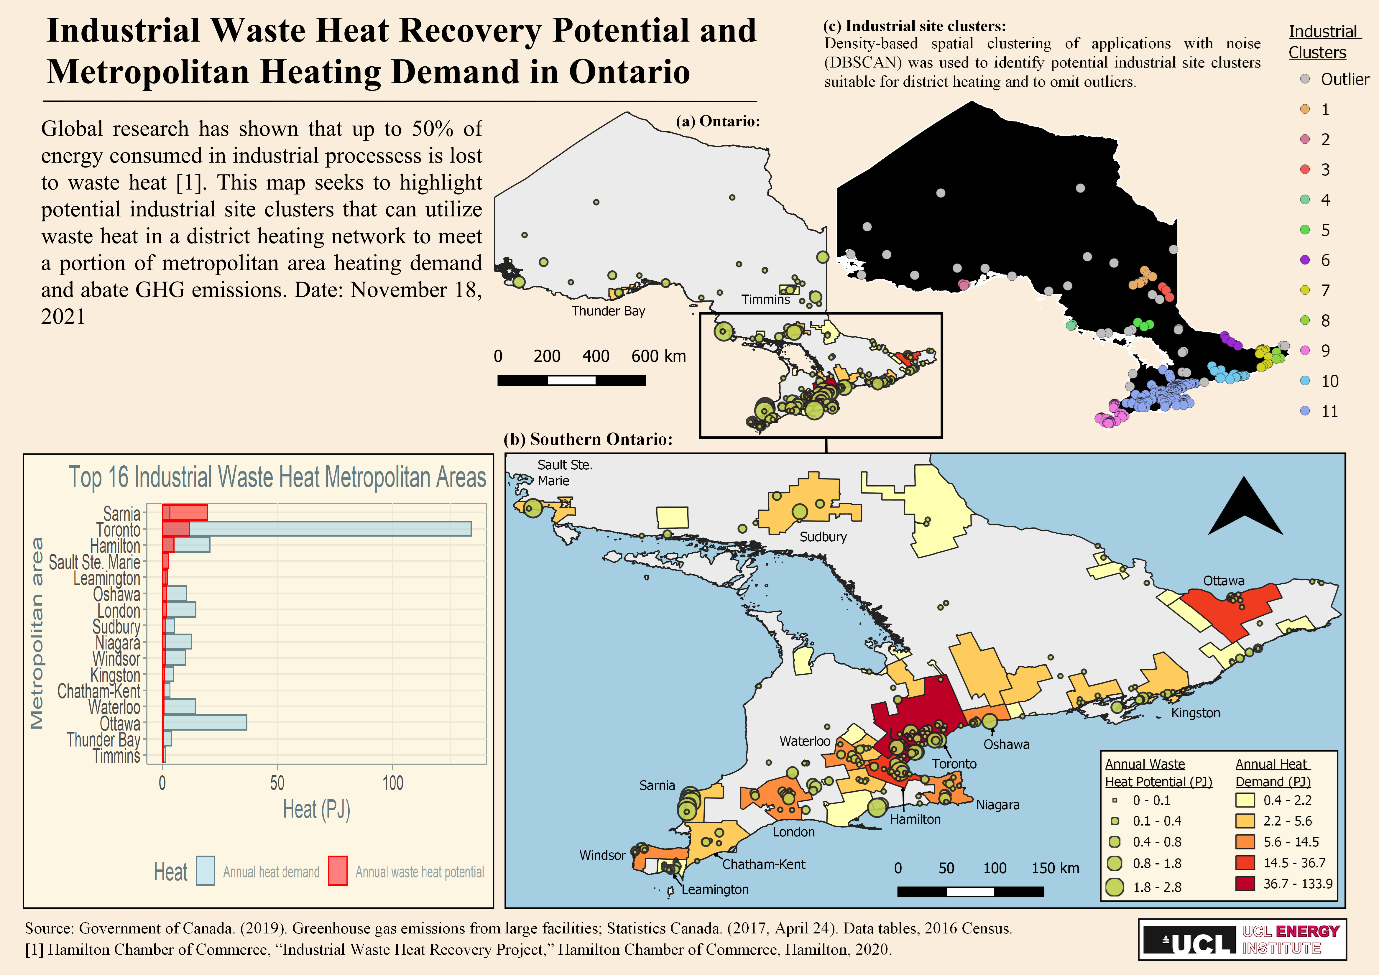 Industrial Waste Heat Recovery Potential and Metropolitan Heating Demand in Ontario